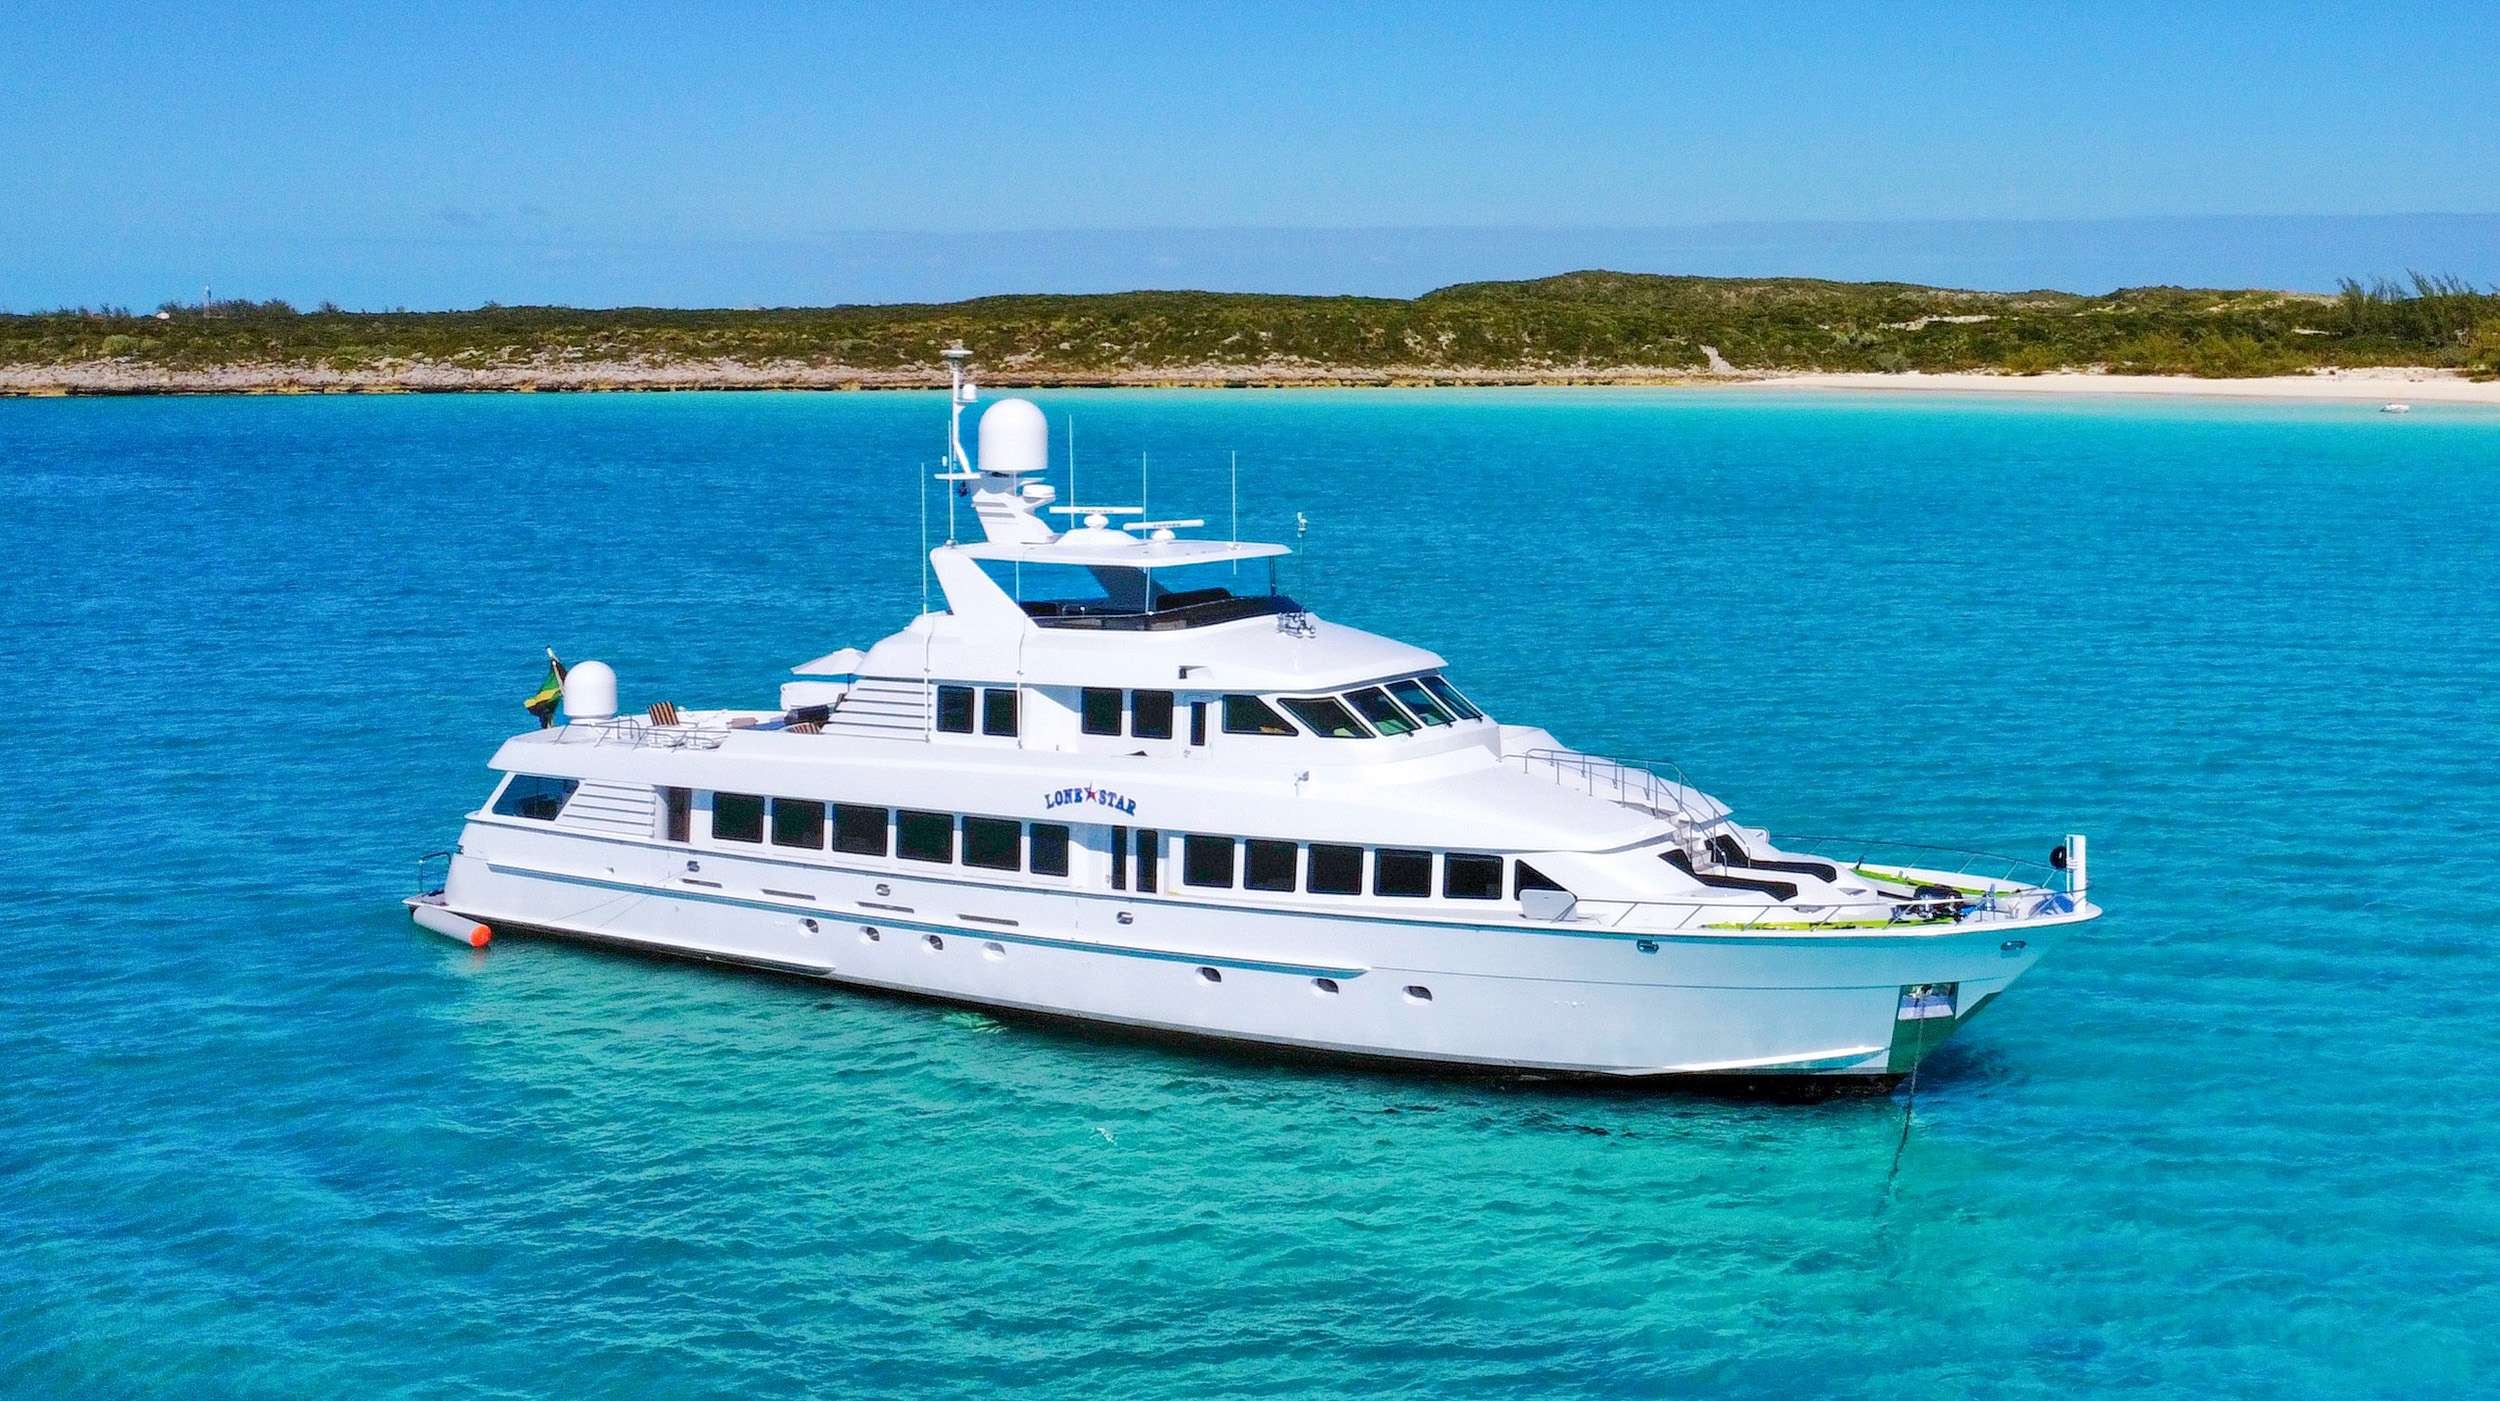 Built by Hatteras as one of only 2 130' super-yacht models, Lone Star is a great choice for family or friends. The open main salon gives 40' of spacious entertaining, complete with marble bar and custom seating. With the additional bridge deck lounge and exterior deck spaces, to include aft dining and seating, an extensive bridge deck behind of the upper lounge featuring walk-around decks leading to bow steps and sun pads, and a fly bridge sun deck with Jacuzzi, guests can find great places to gather or use as their own intimate hideaway!  

Cabins consist of a large full width on deck primary cabin with king berth, and three ensuite queen cabins plus one ensuite twin cabin below. The lower cabins have a lovely foyer that provides a refrigerator, ice maker, and snack station.

Lone Star received numerous recent upgrades to include new custom flooring, new appliances and fixtures, many safety and control systems, plus new entertainment systems. She was lovingly cared for by a very experienced Yachtsman and his crew for the past seven years before being sold to her present owner. During this time, no expense was spared, most every system has been rebuilt or replaced making her better than ever!&nbsp;